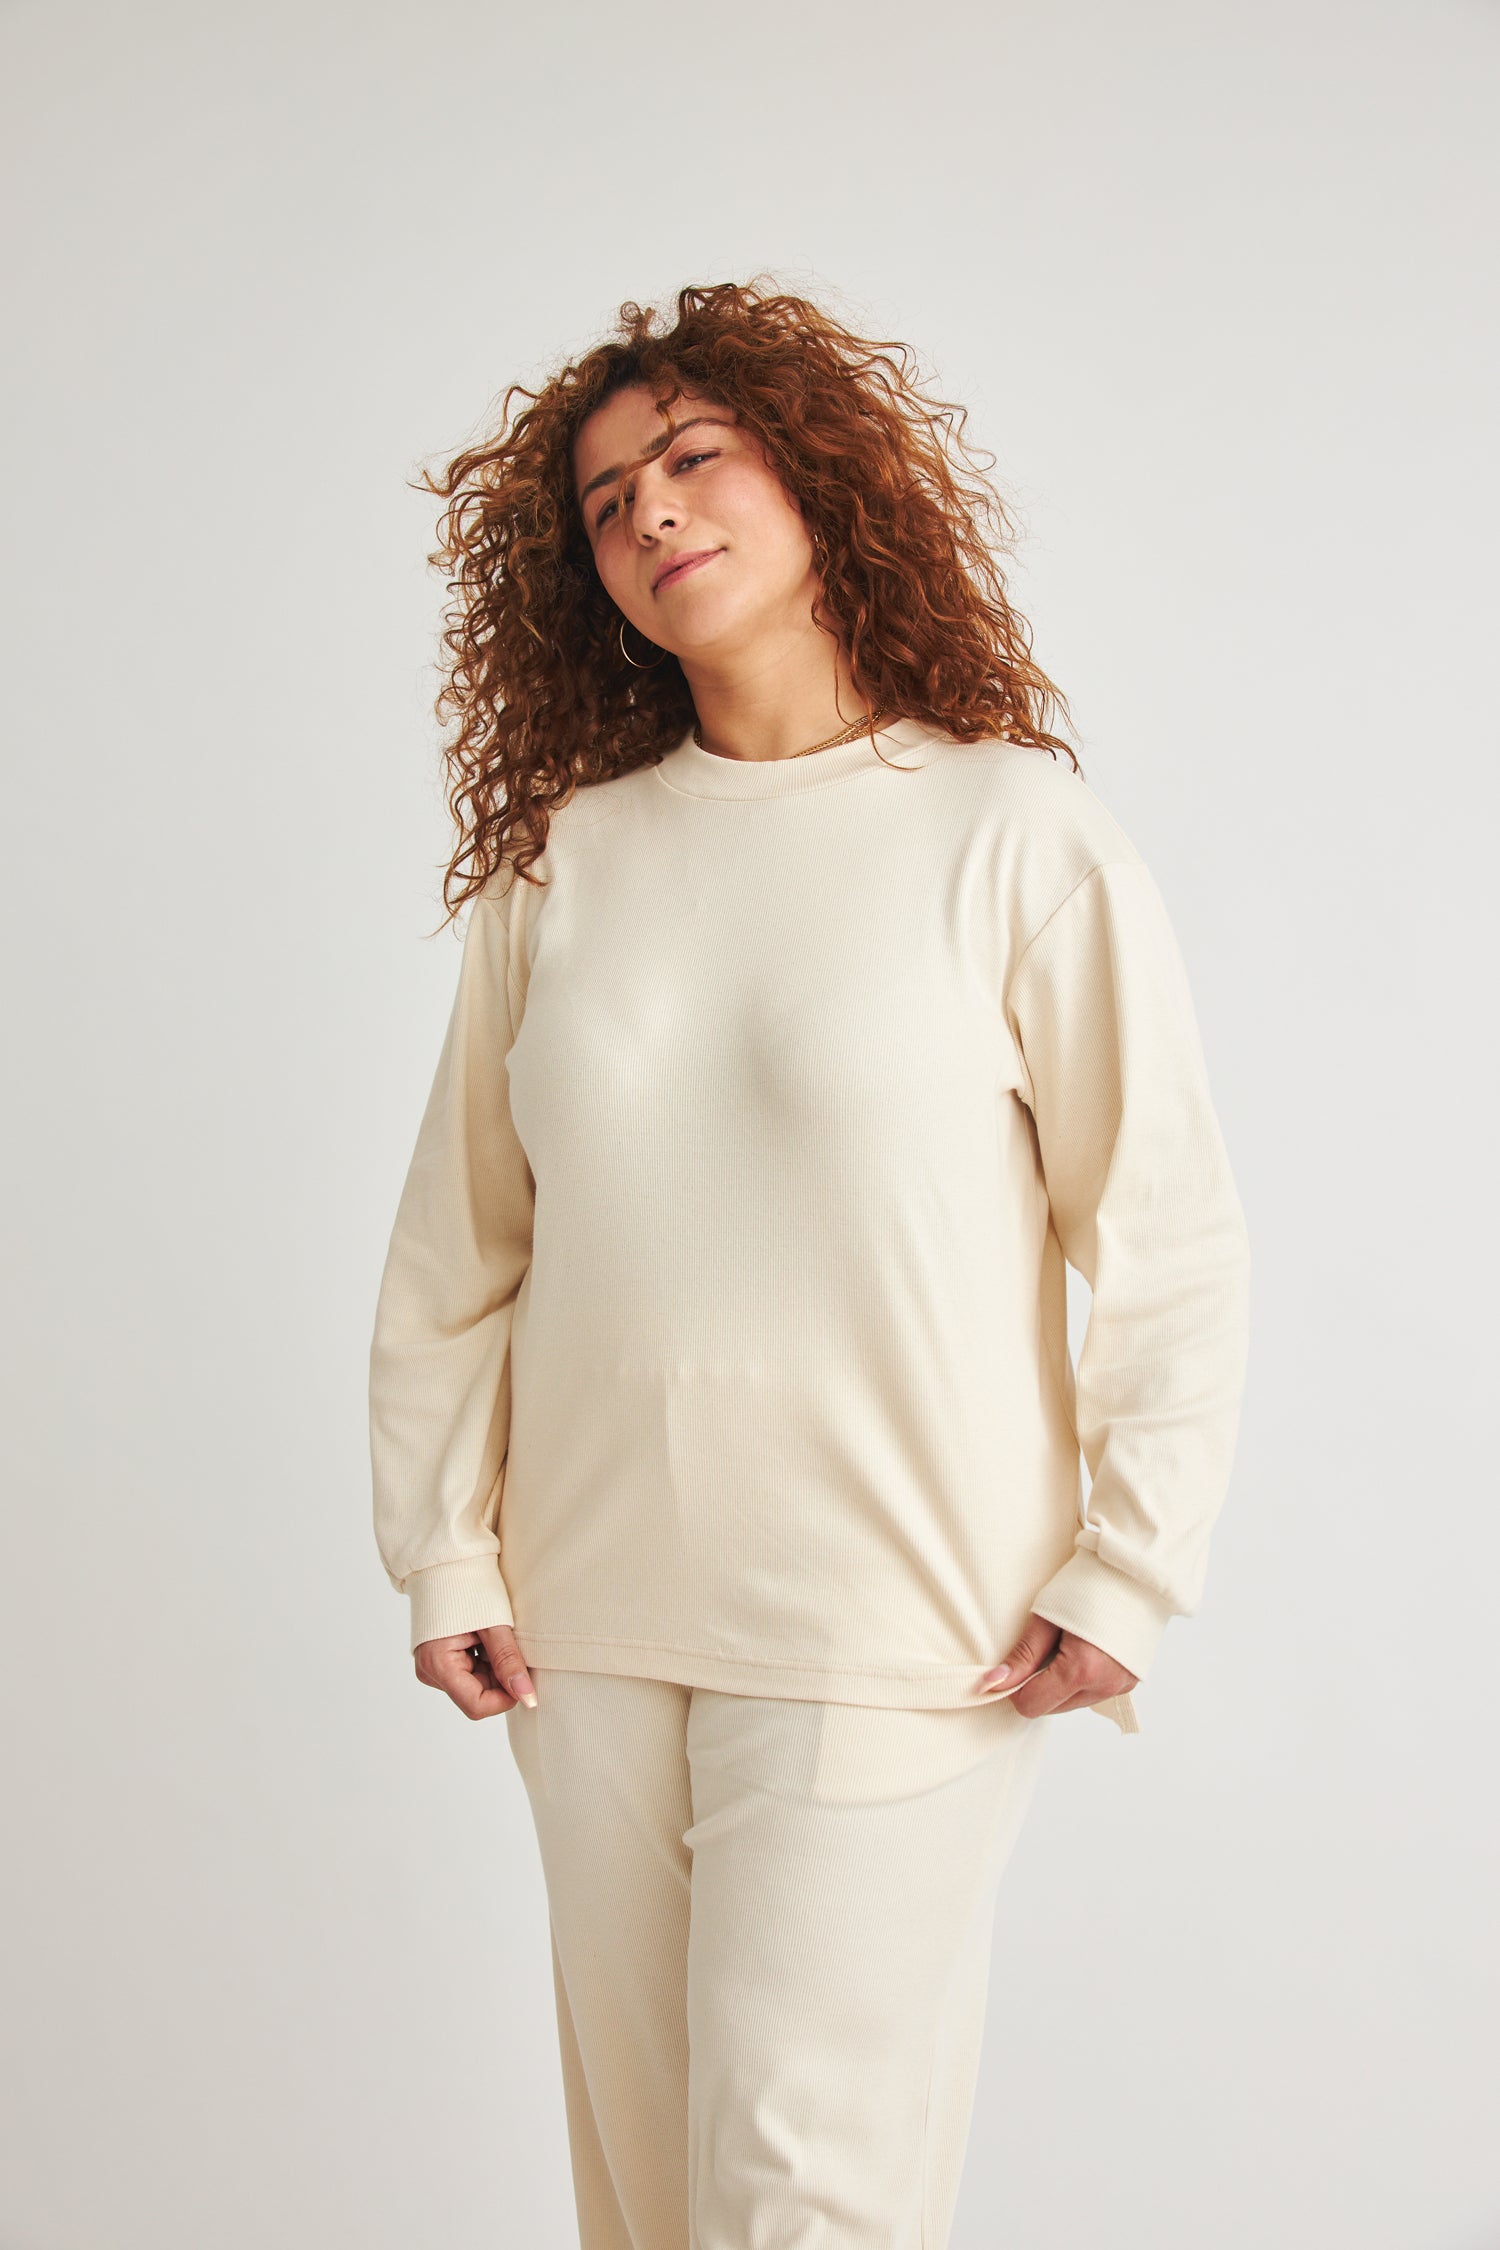 Natural-colored Bex sweatshirt made of organic cotton from Baige the Label